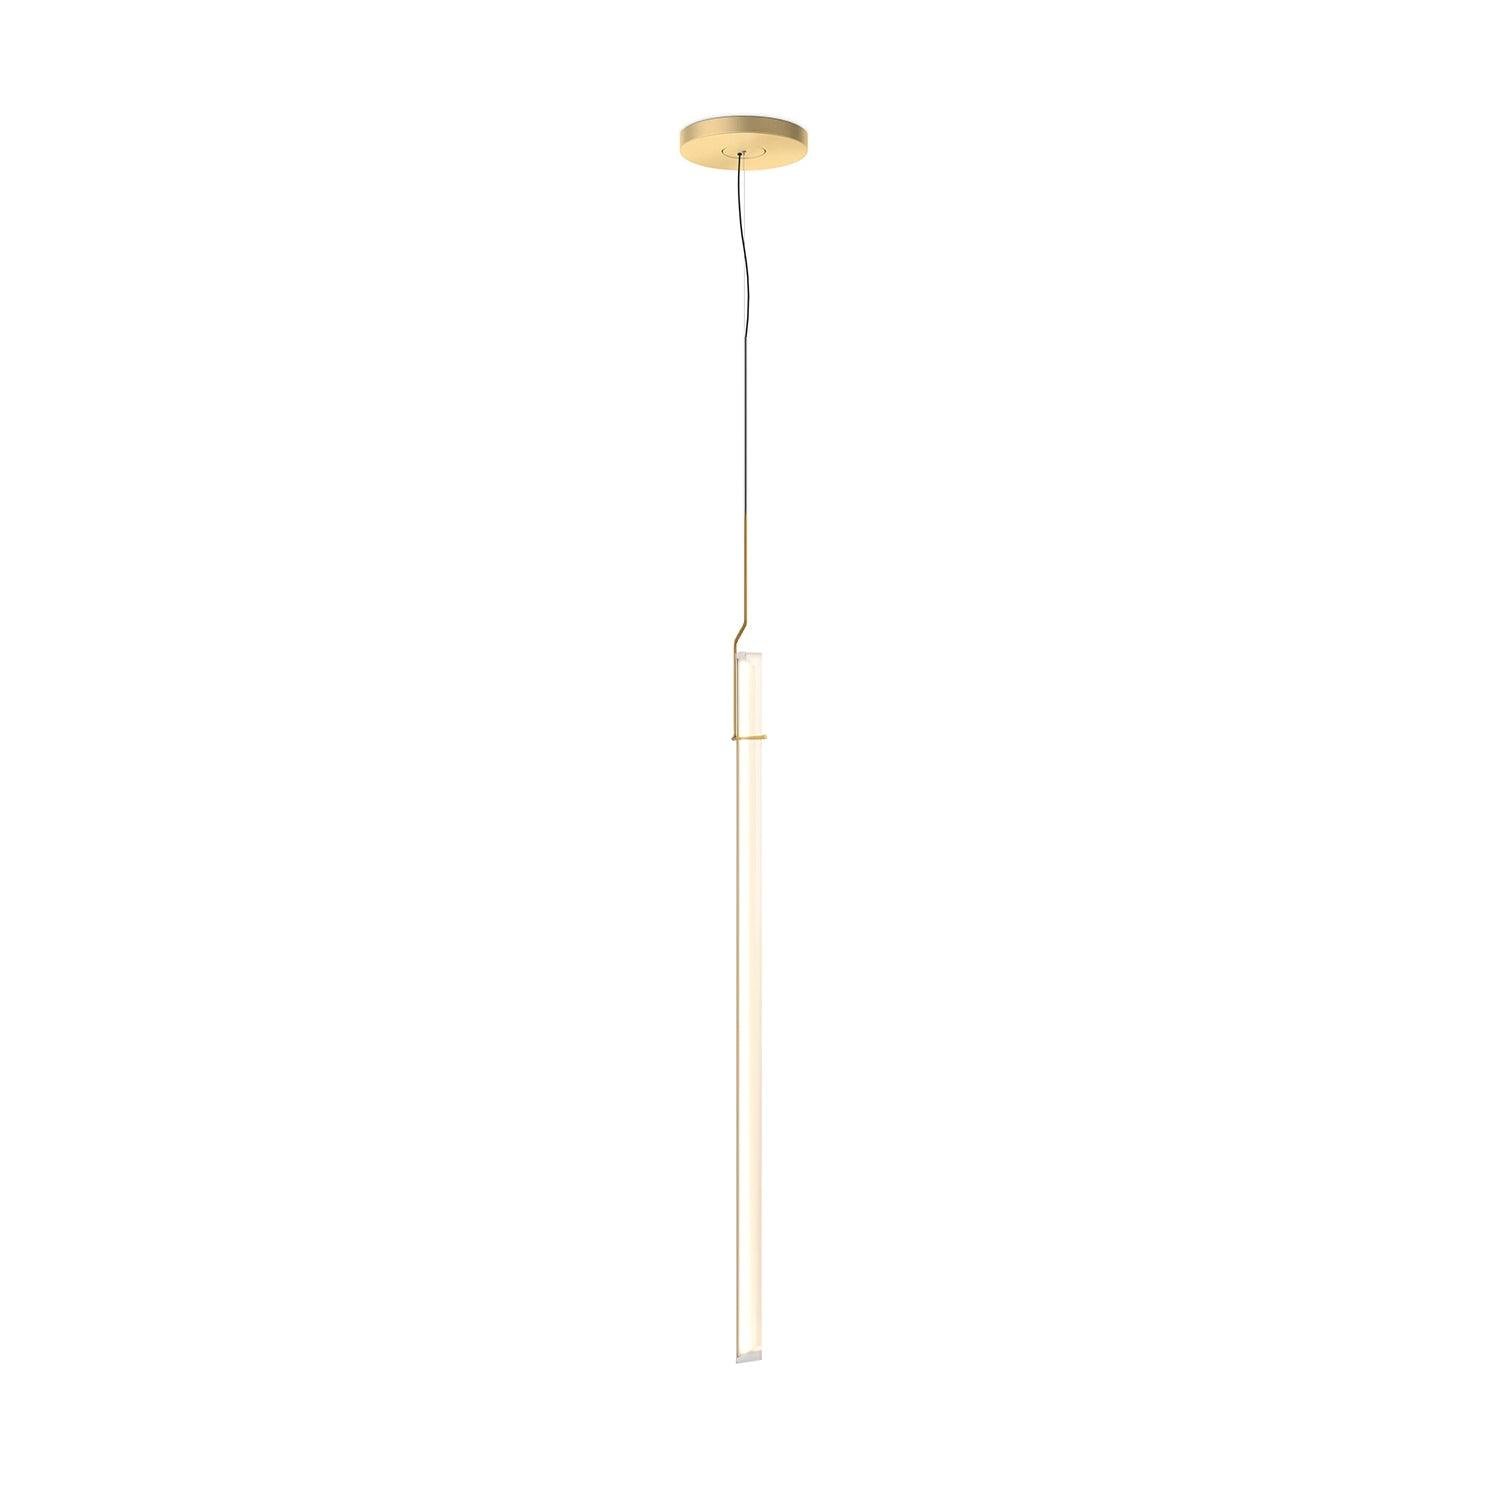 Gold Halo Jewel Straight Pendant Light in Cool Light, measuring 7.9" in diameter and 39.4" in height (20cm x 100cm).